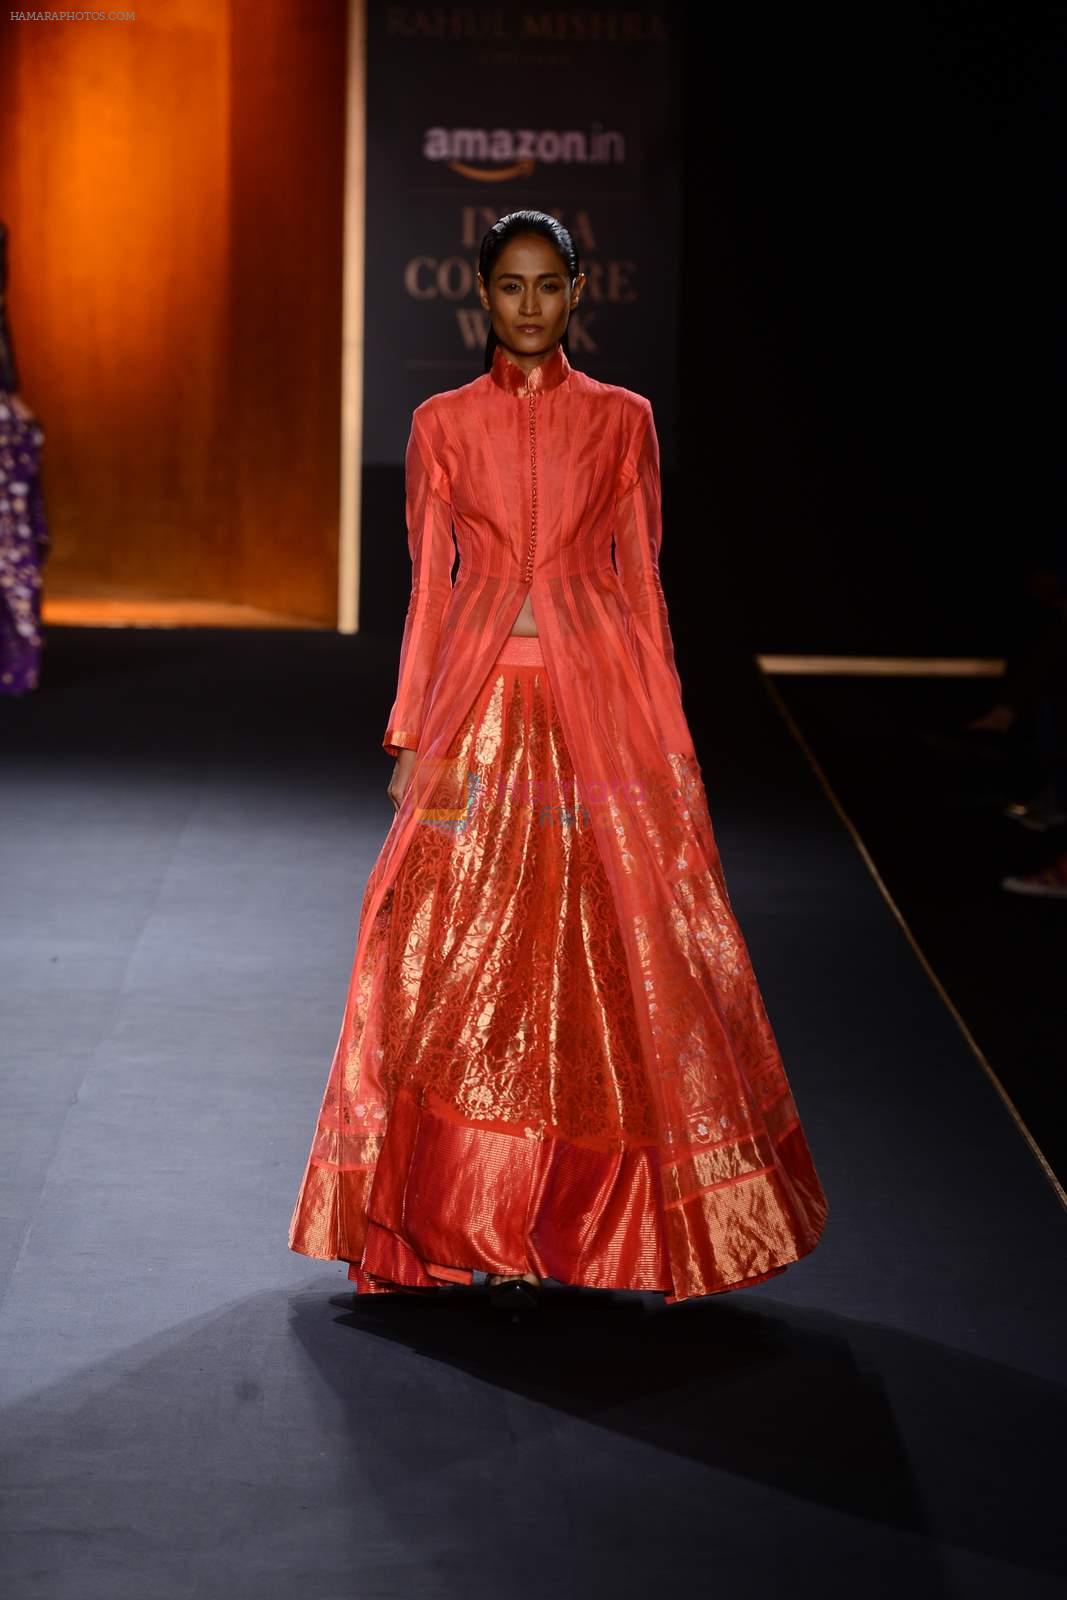 Model walks for Rahul Mishra at India Couture week day 2 on 30th July 2015